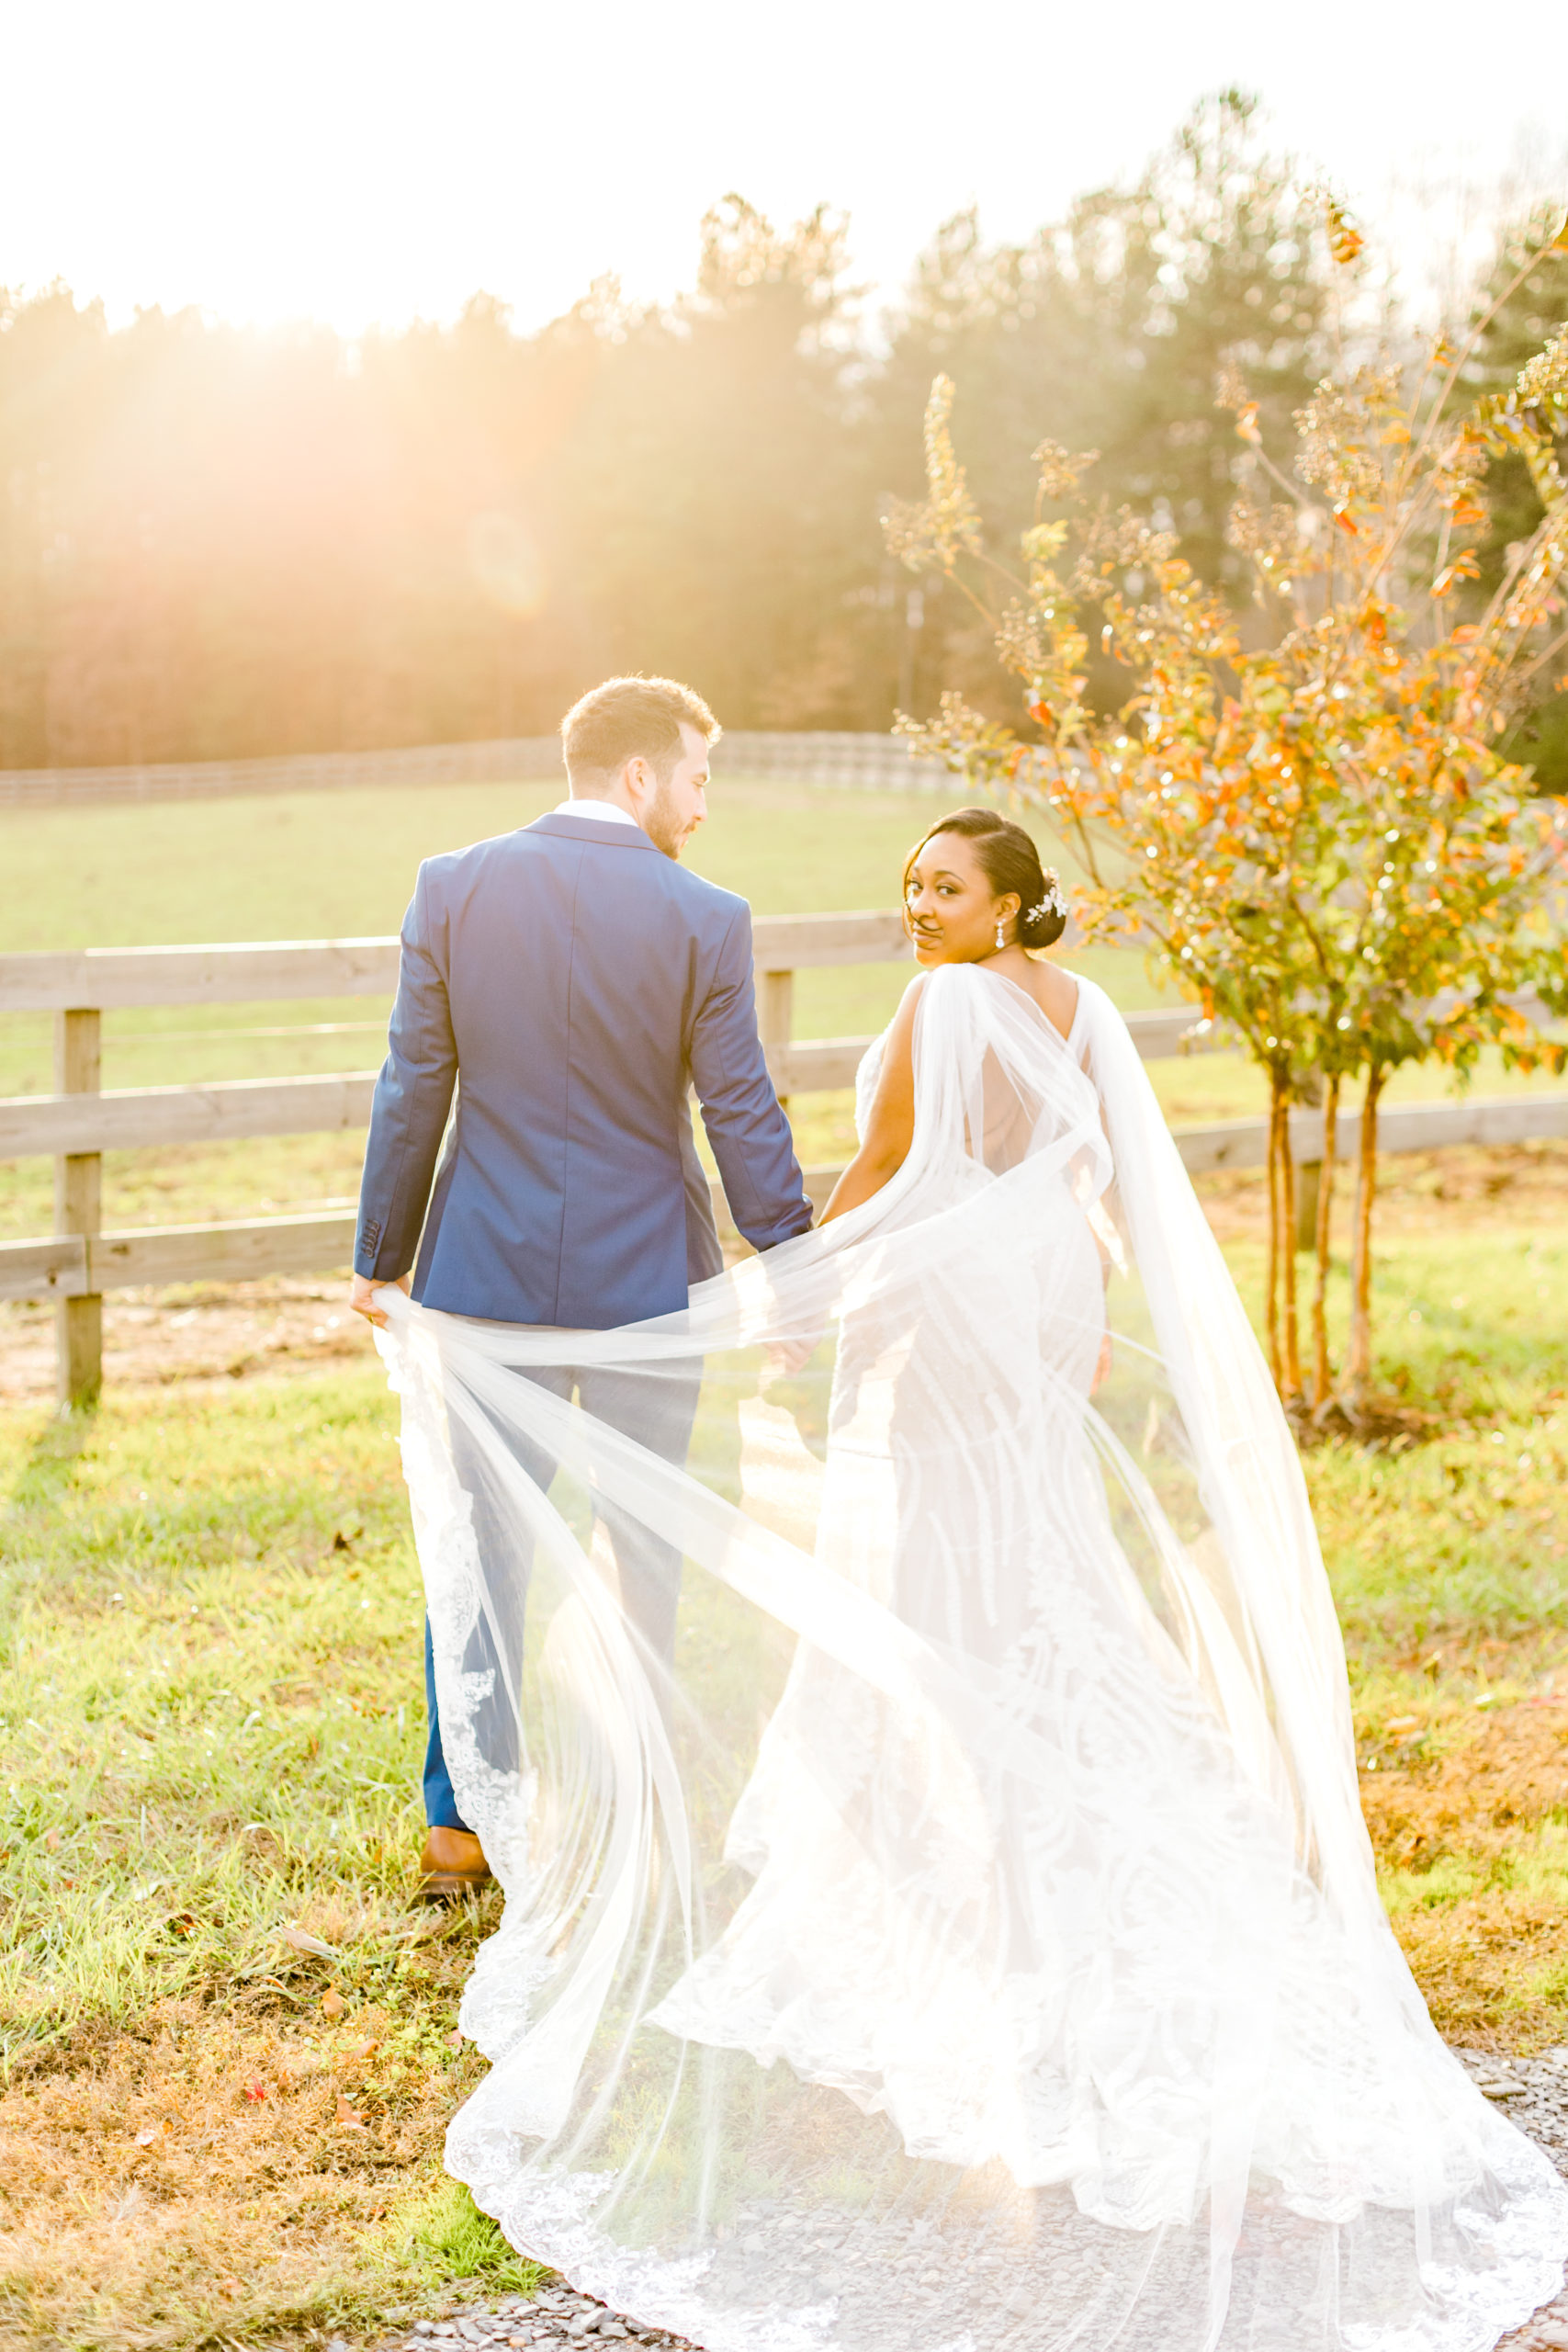 Interracial wedding couple walking into sunset, bride turned and smiling towards the camera